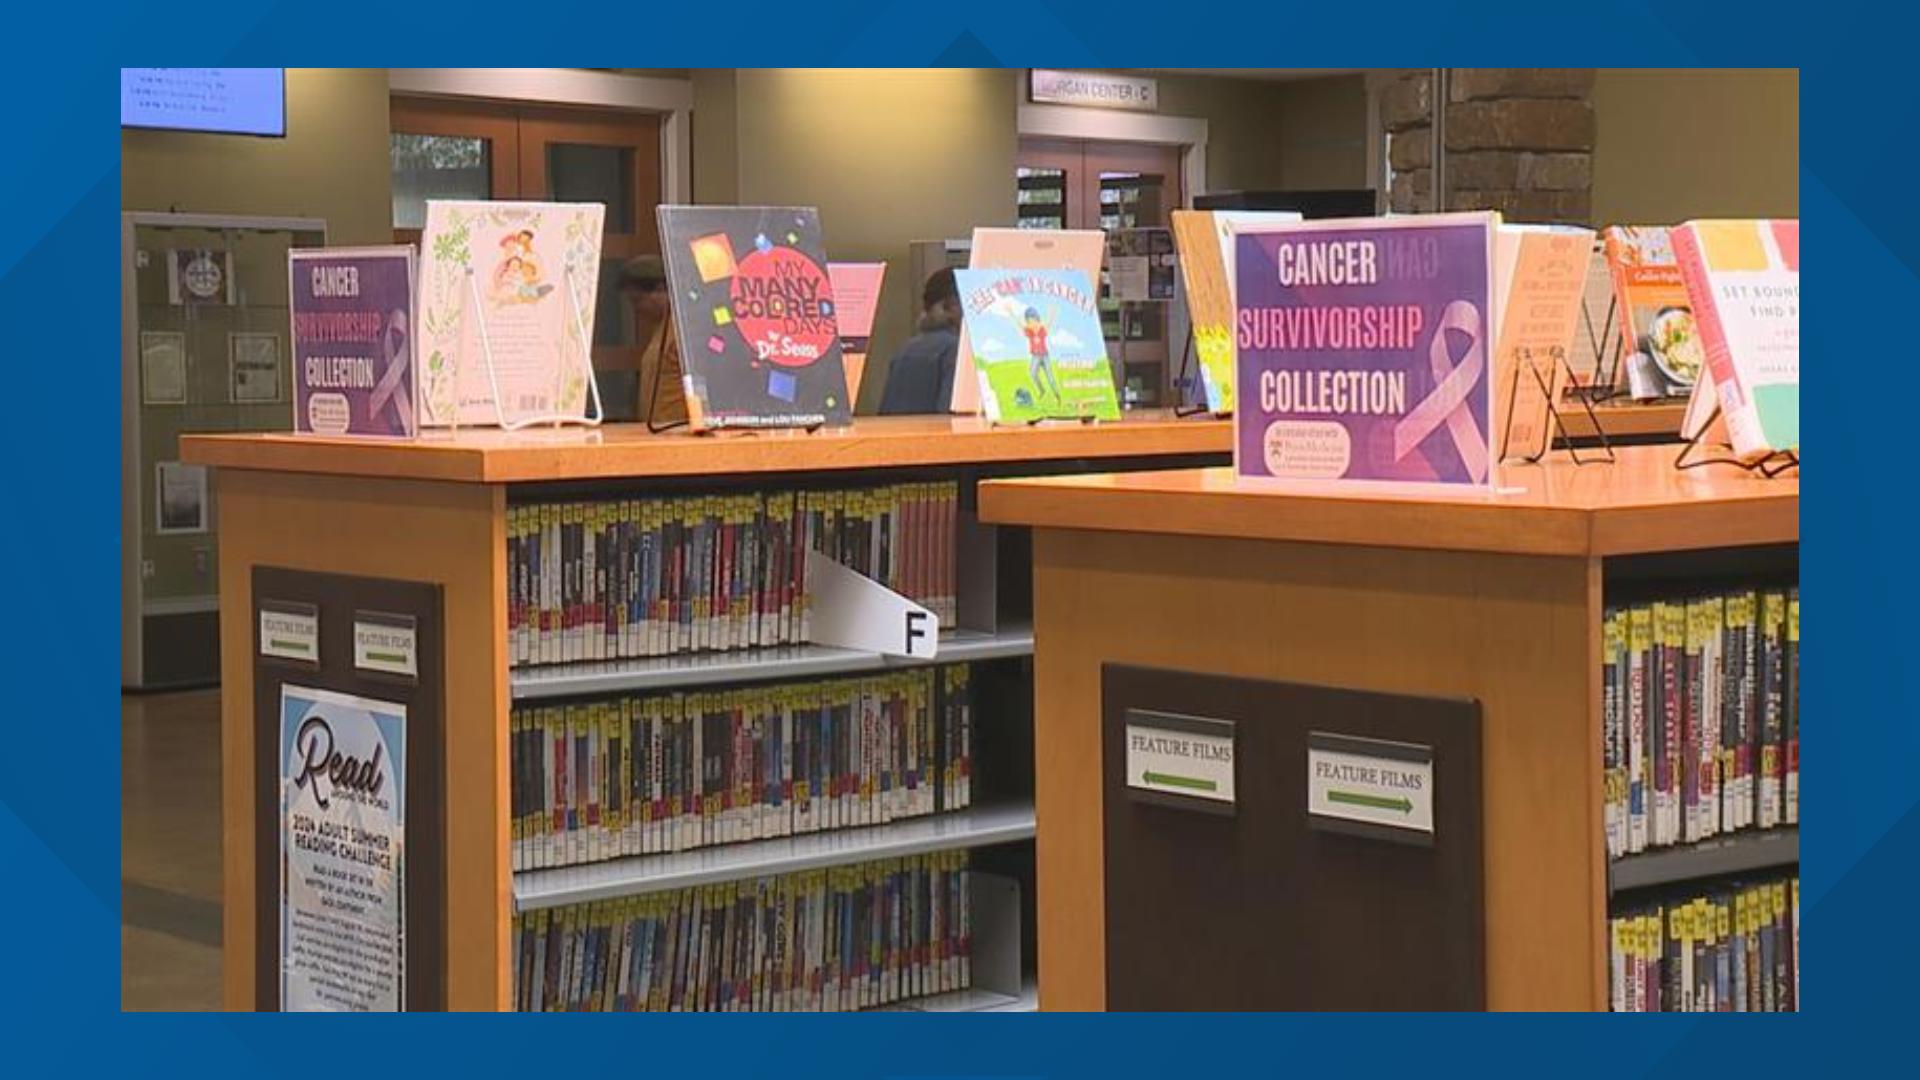 A Special Survivorship Book Collection was unveiled on Wednesday to provide resources for those who want to learn more about cancer.